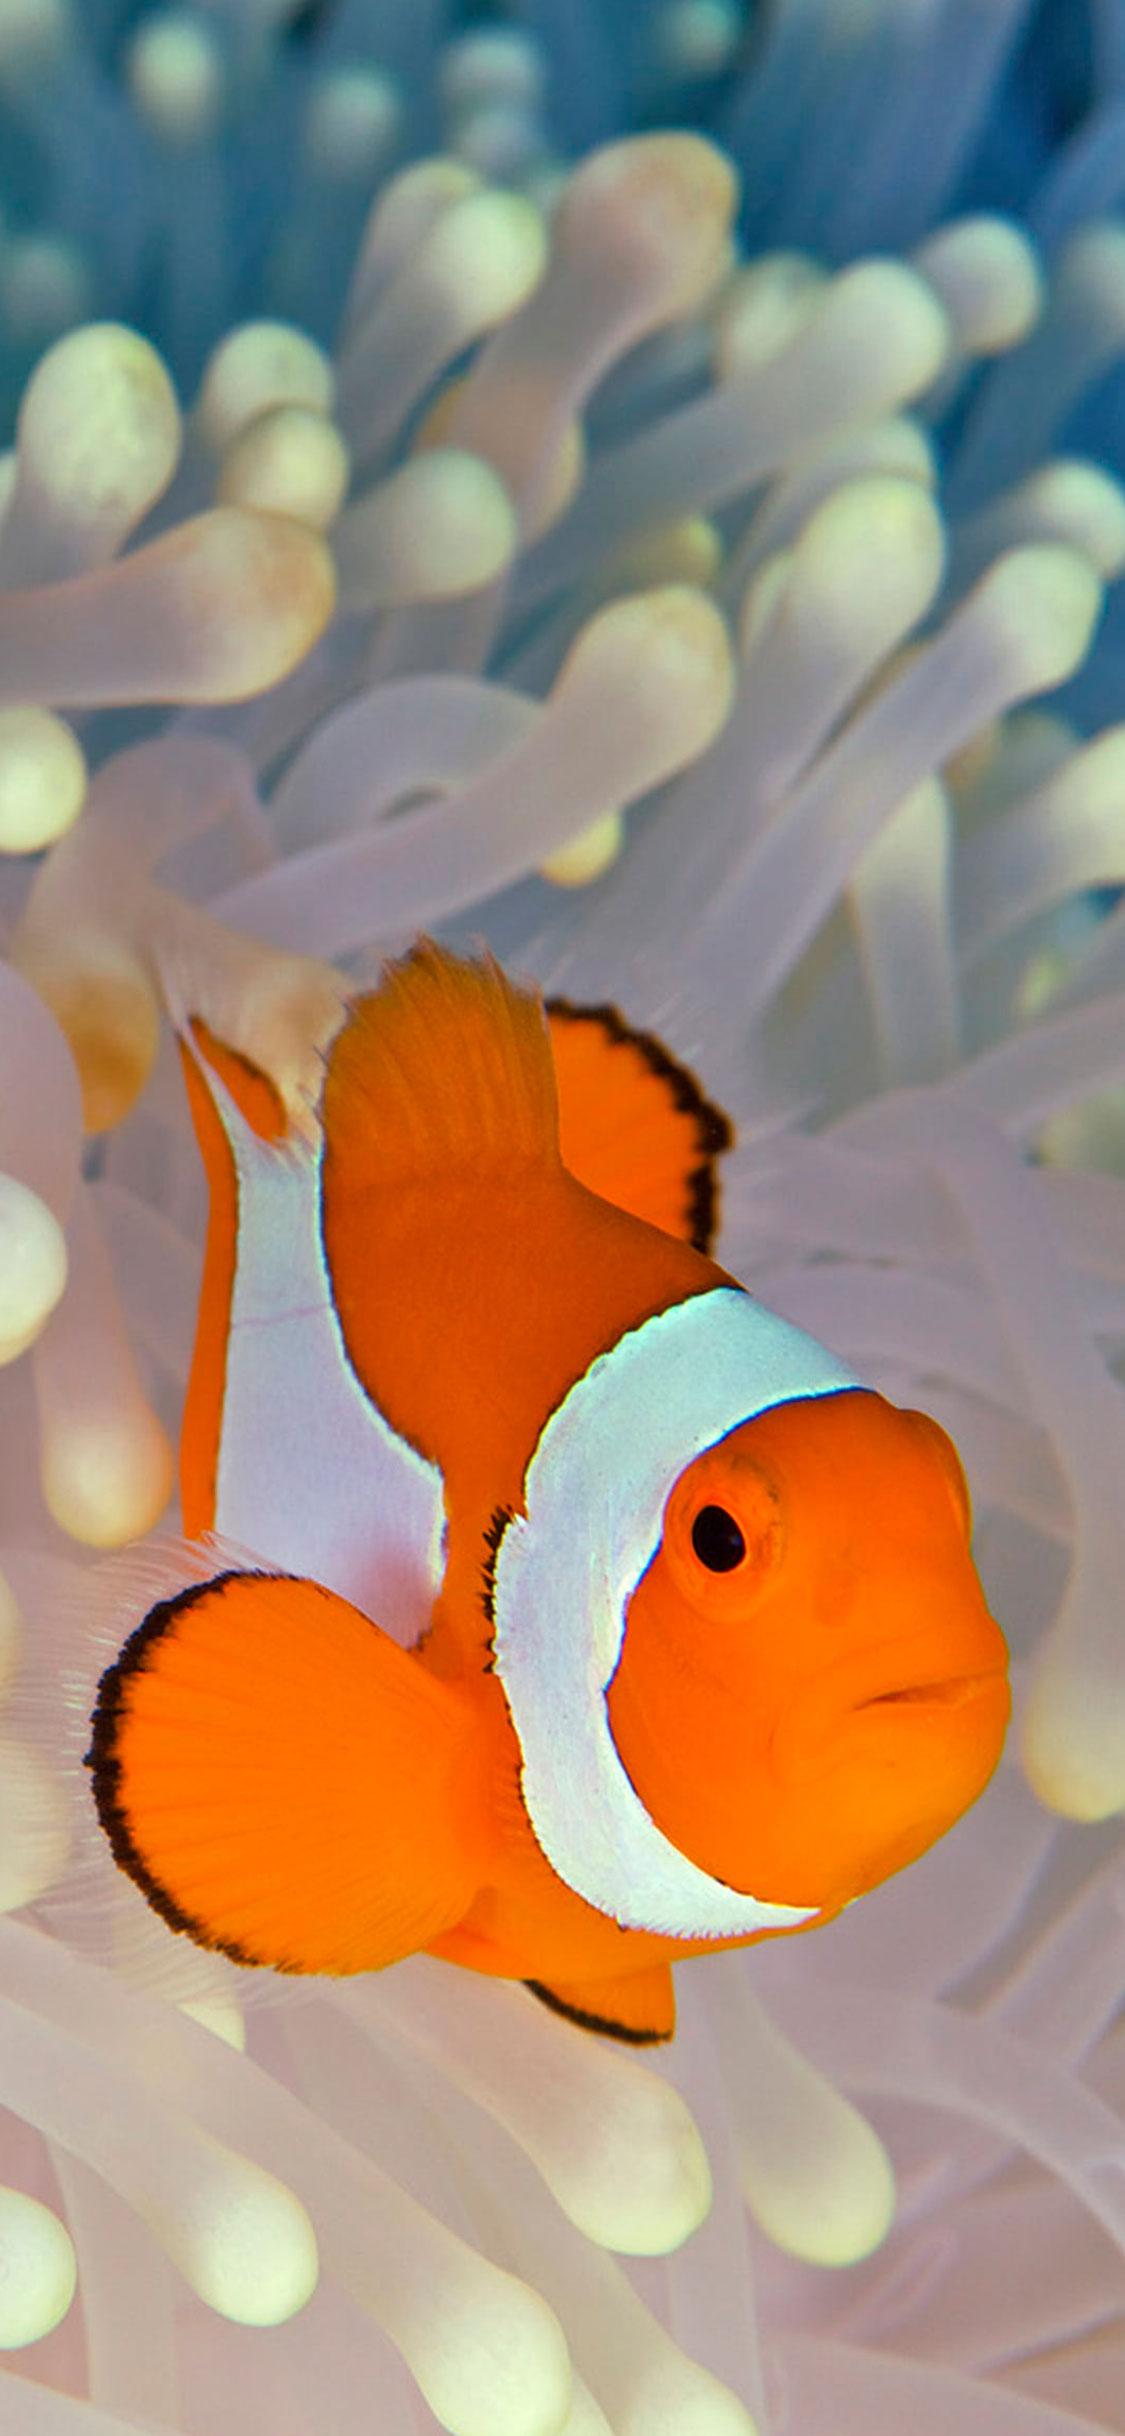 Clownfish Wallpaper for iPhone X, 6